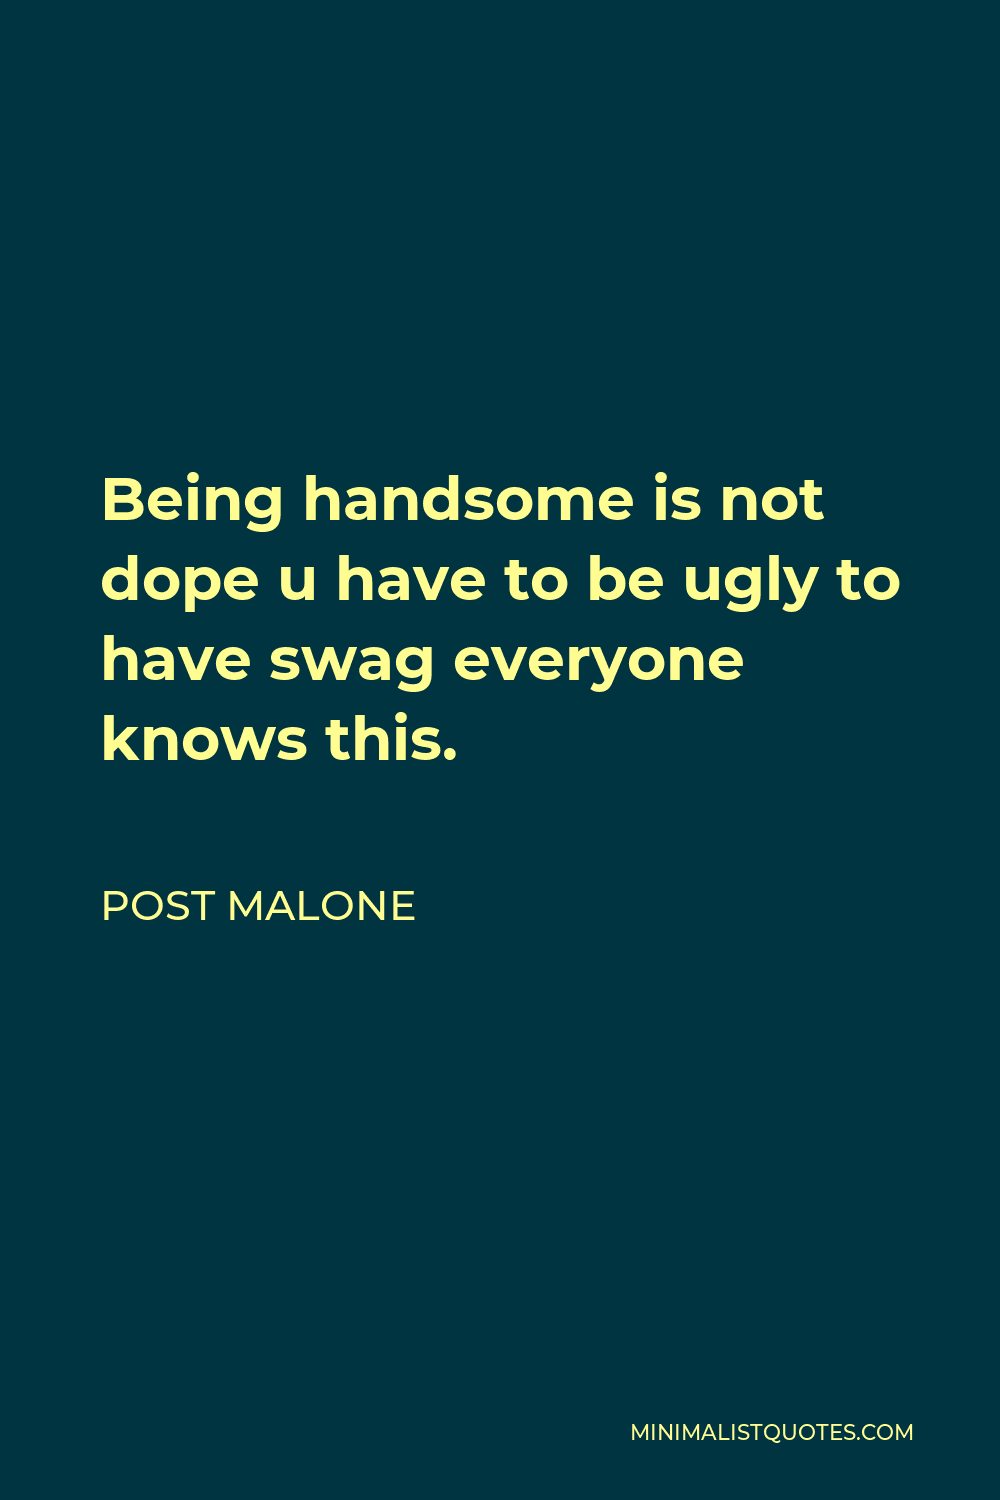 Post Malone Quote: Being handsome is not dope u have to be ugly to have  swag everyone knows this.